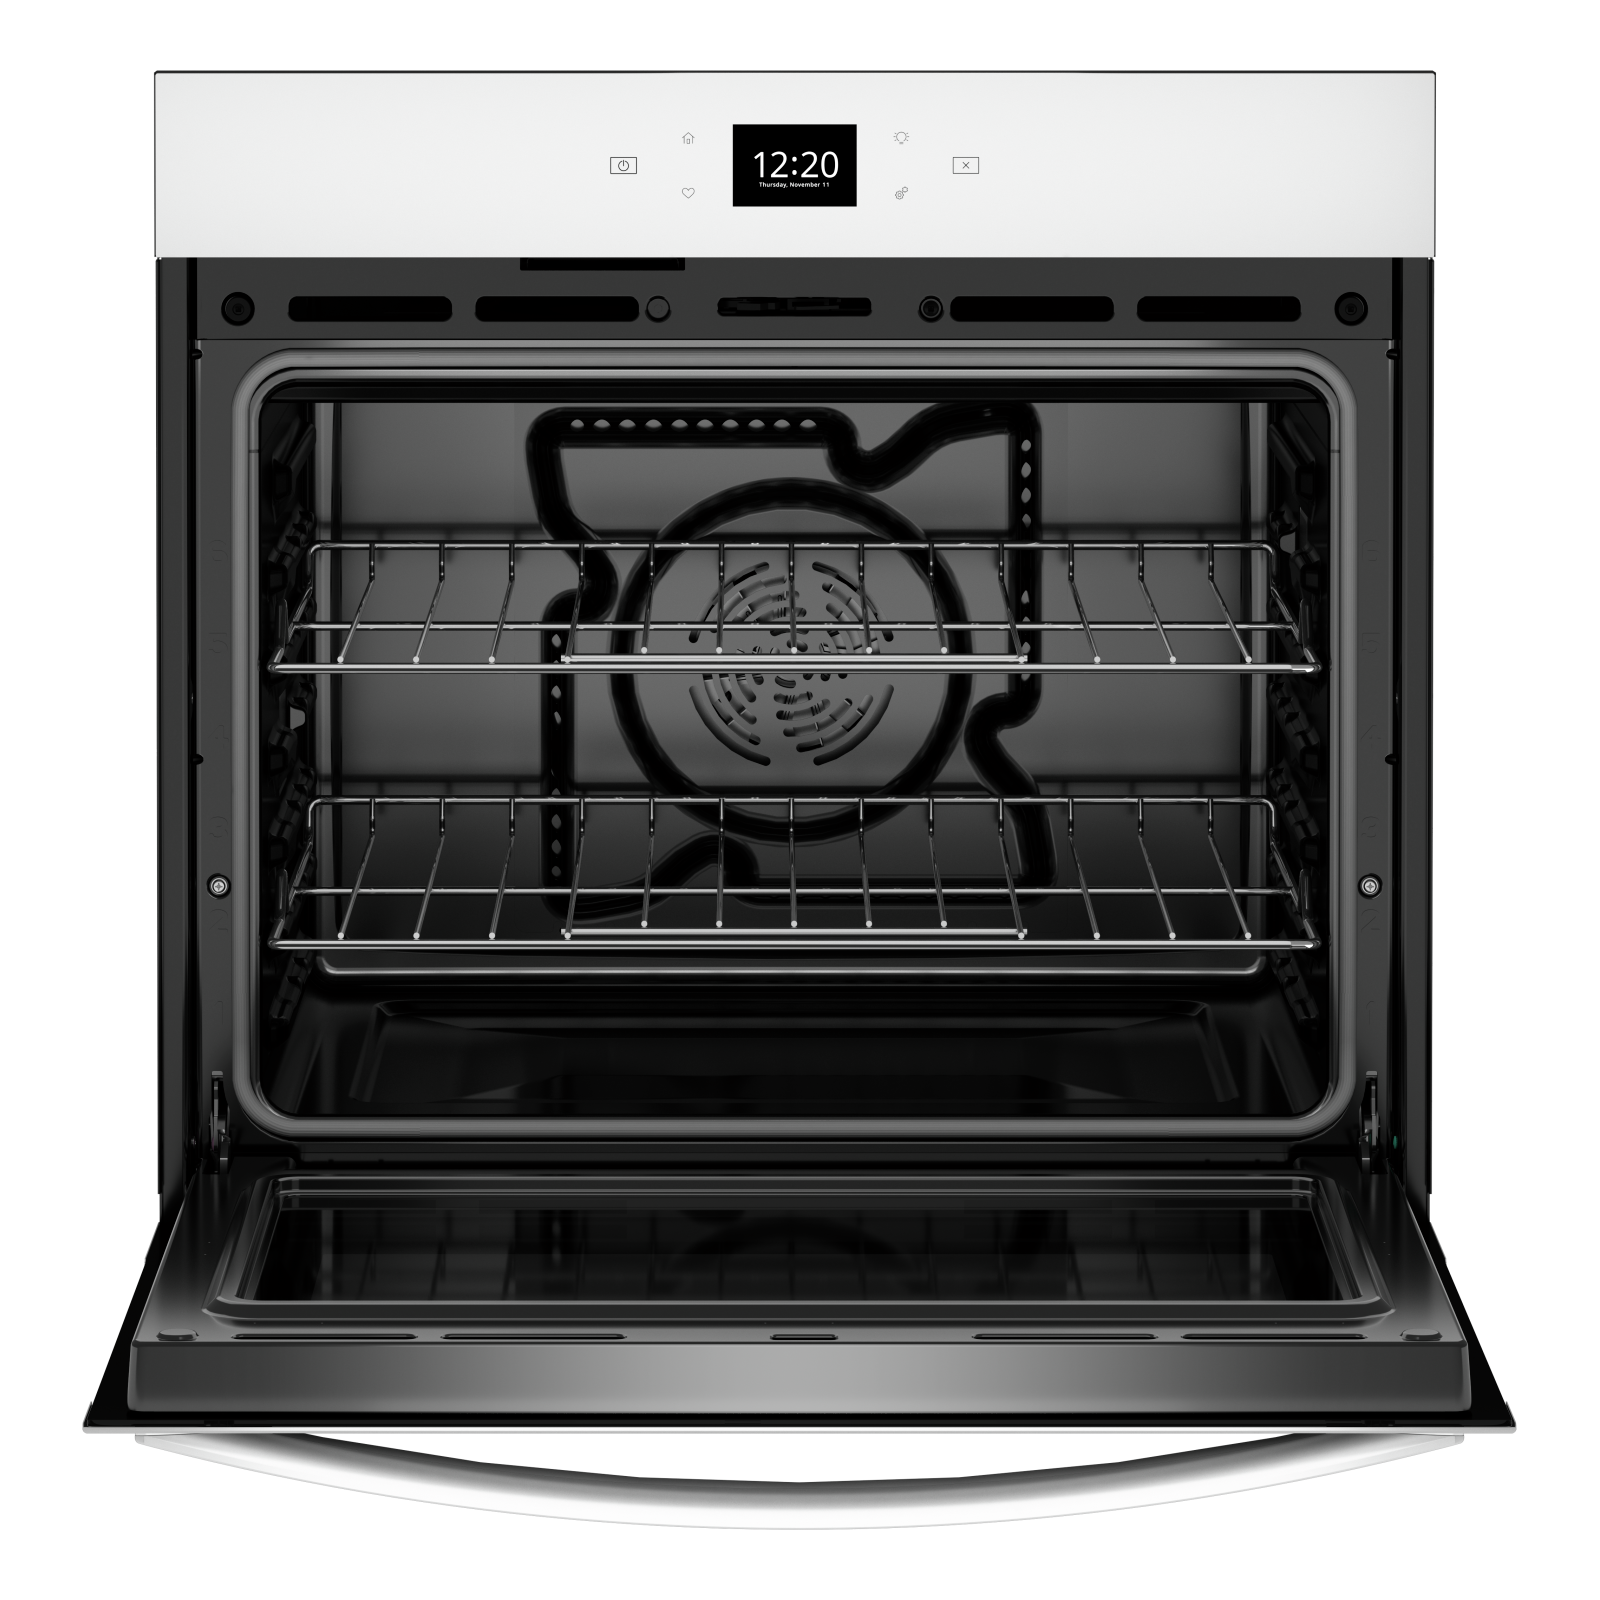 Whirlpool - 4.3 cu. ft Single Wall Oven in White - WOES5027LW